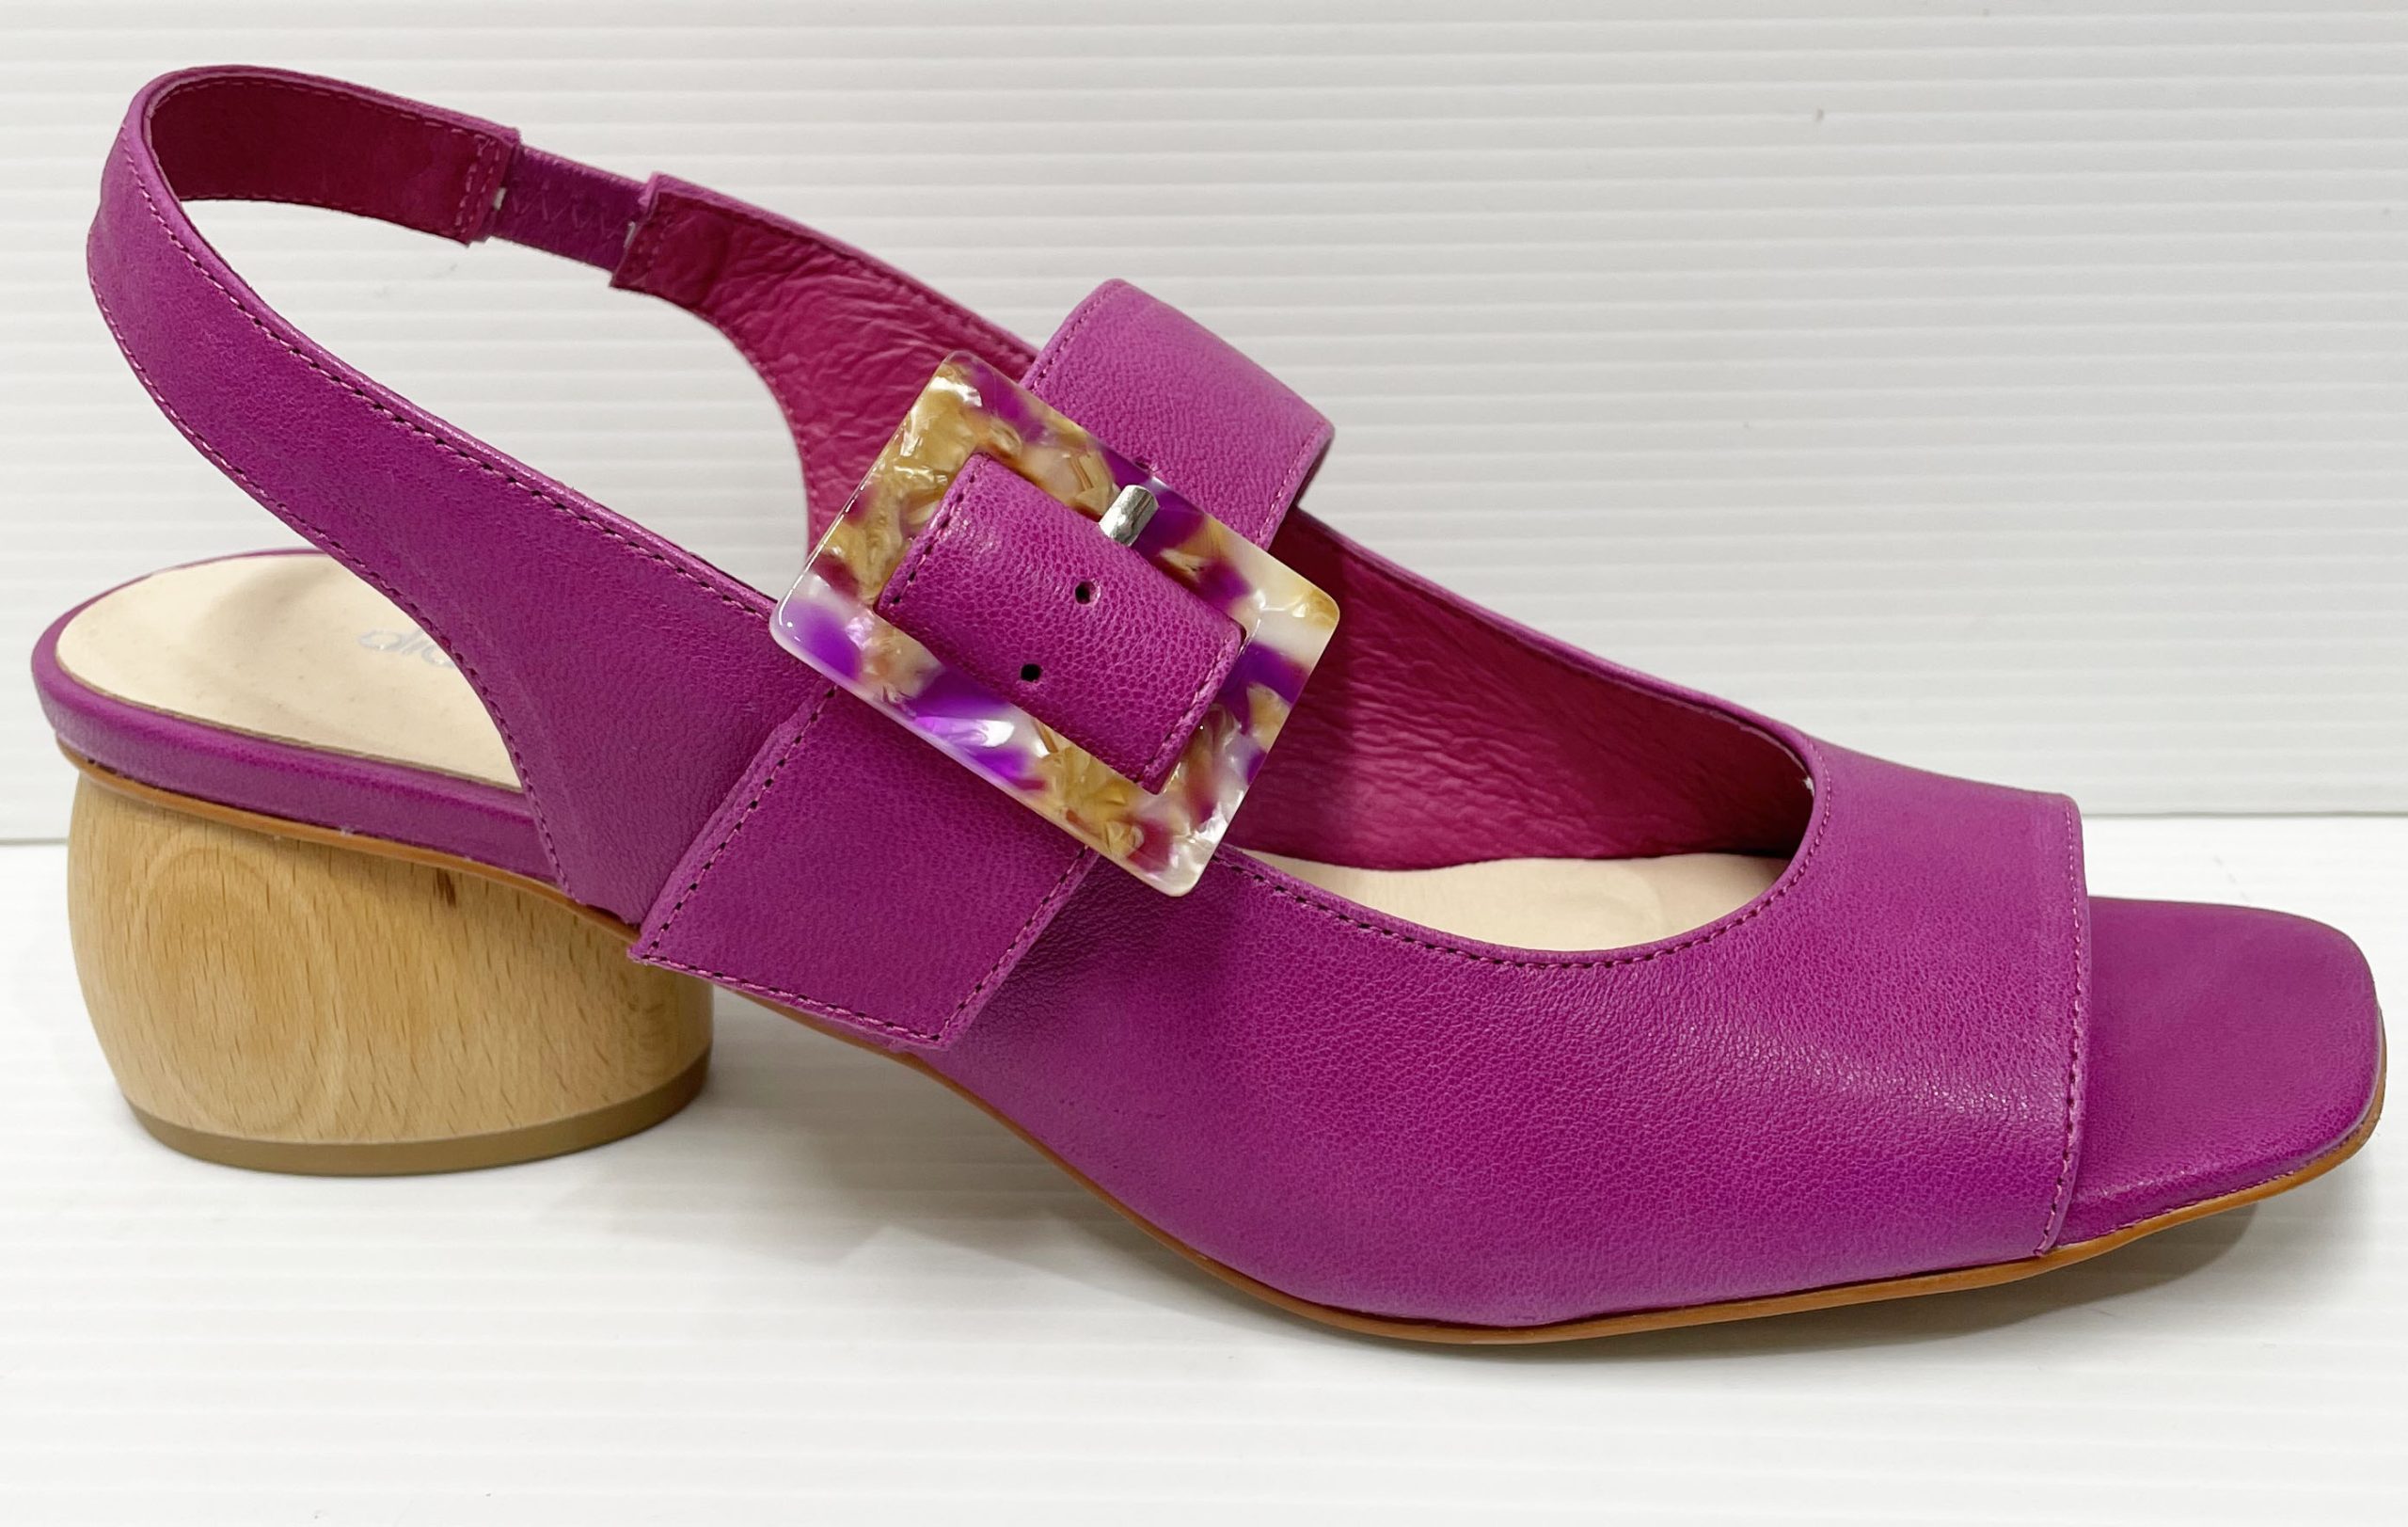 Diana Ferrari Fabela Magenta – Cooroy Shoes and Accessories